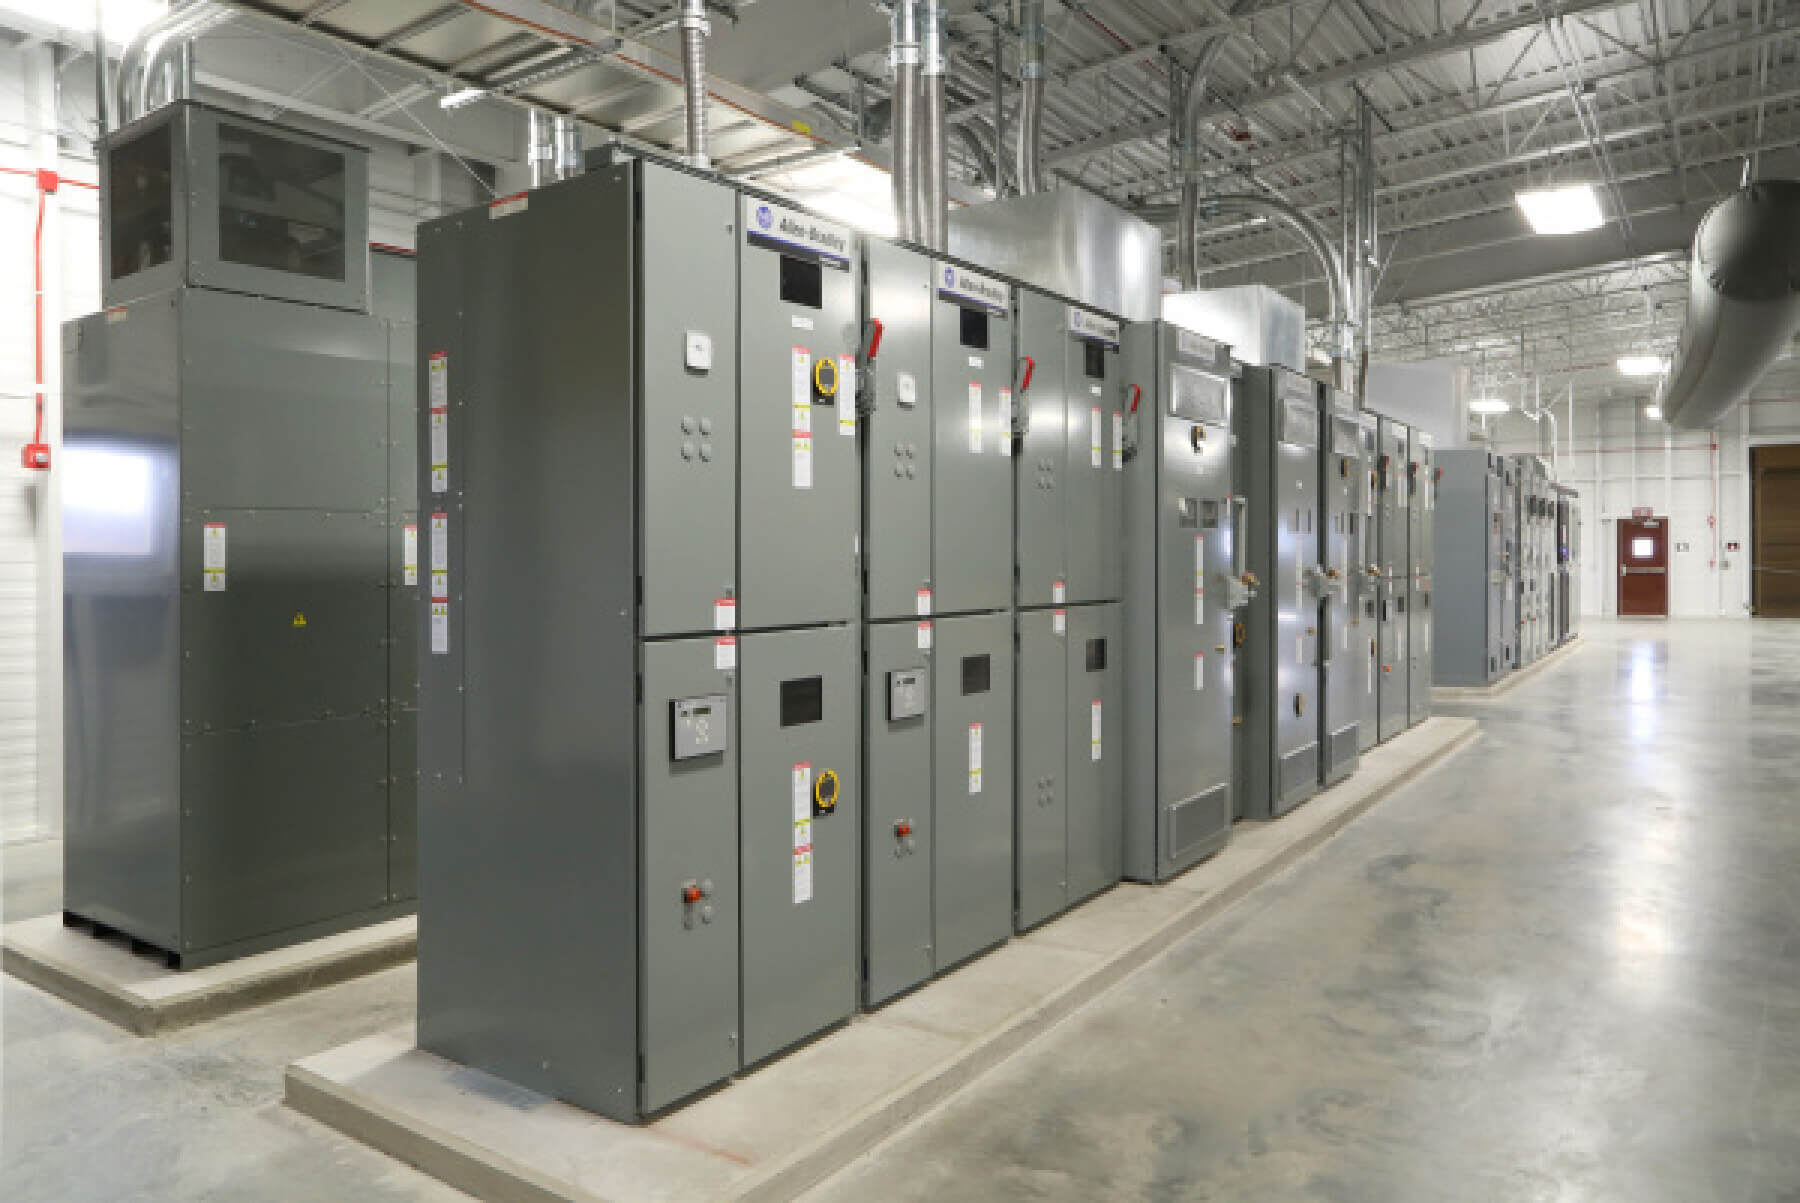 Electrical systems at K.R. Harrington Water Treatment Plant